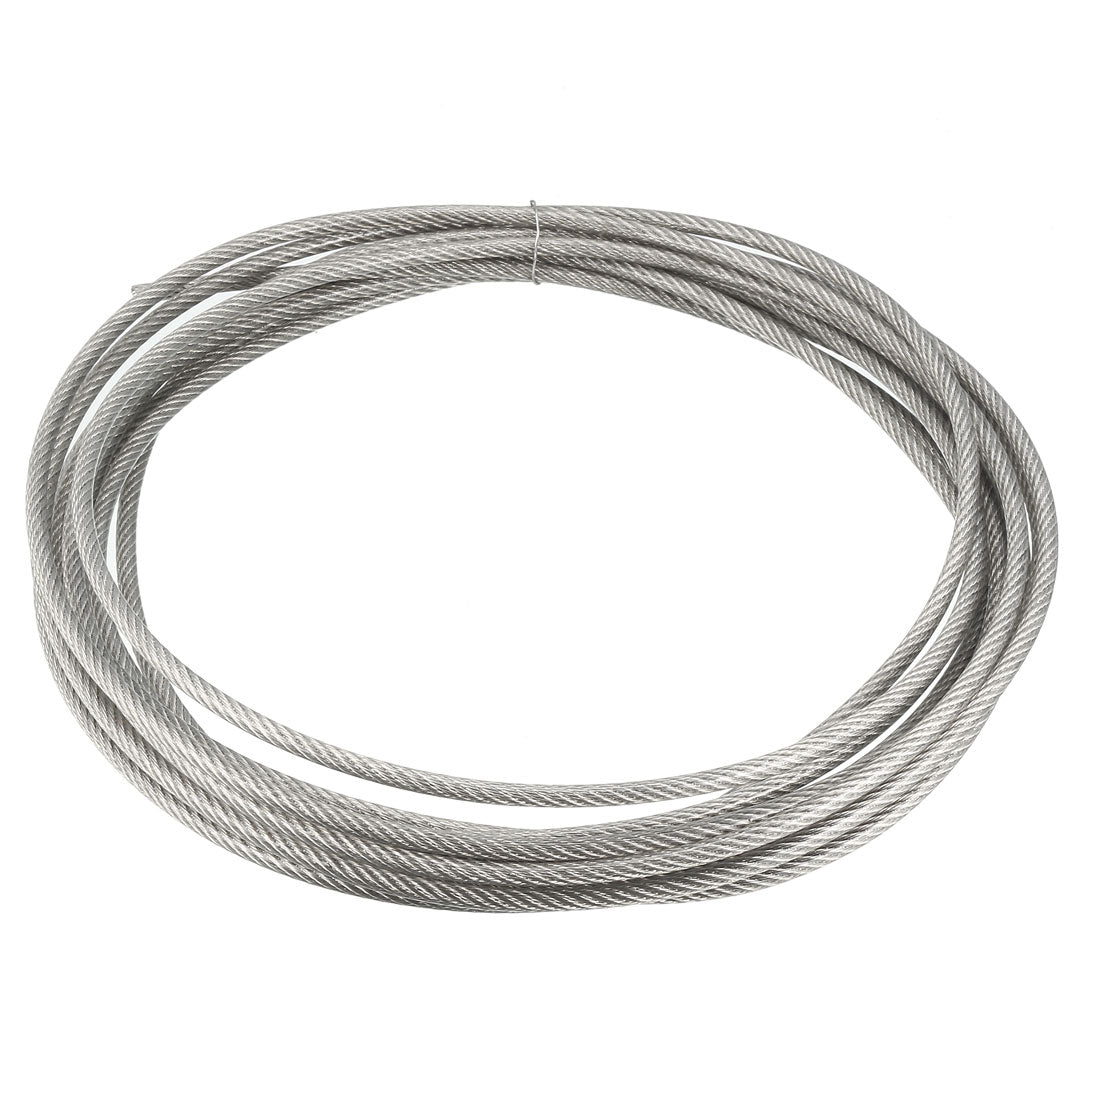 uxcell Uxcell Stainless Steel Wire Rope Cable 4mm 0.16 inch Dia 26.2ft 8m Length 8 Gauge 304 Grade PVC Coated for Hoist Lifting Grinder Pulley Wheel